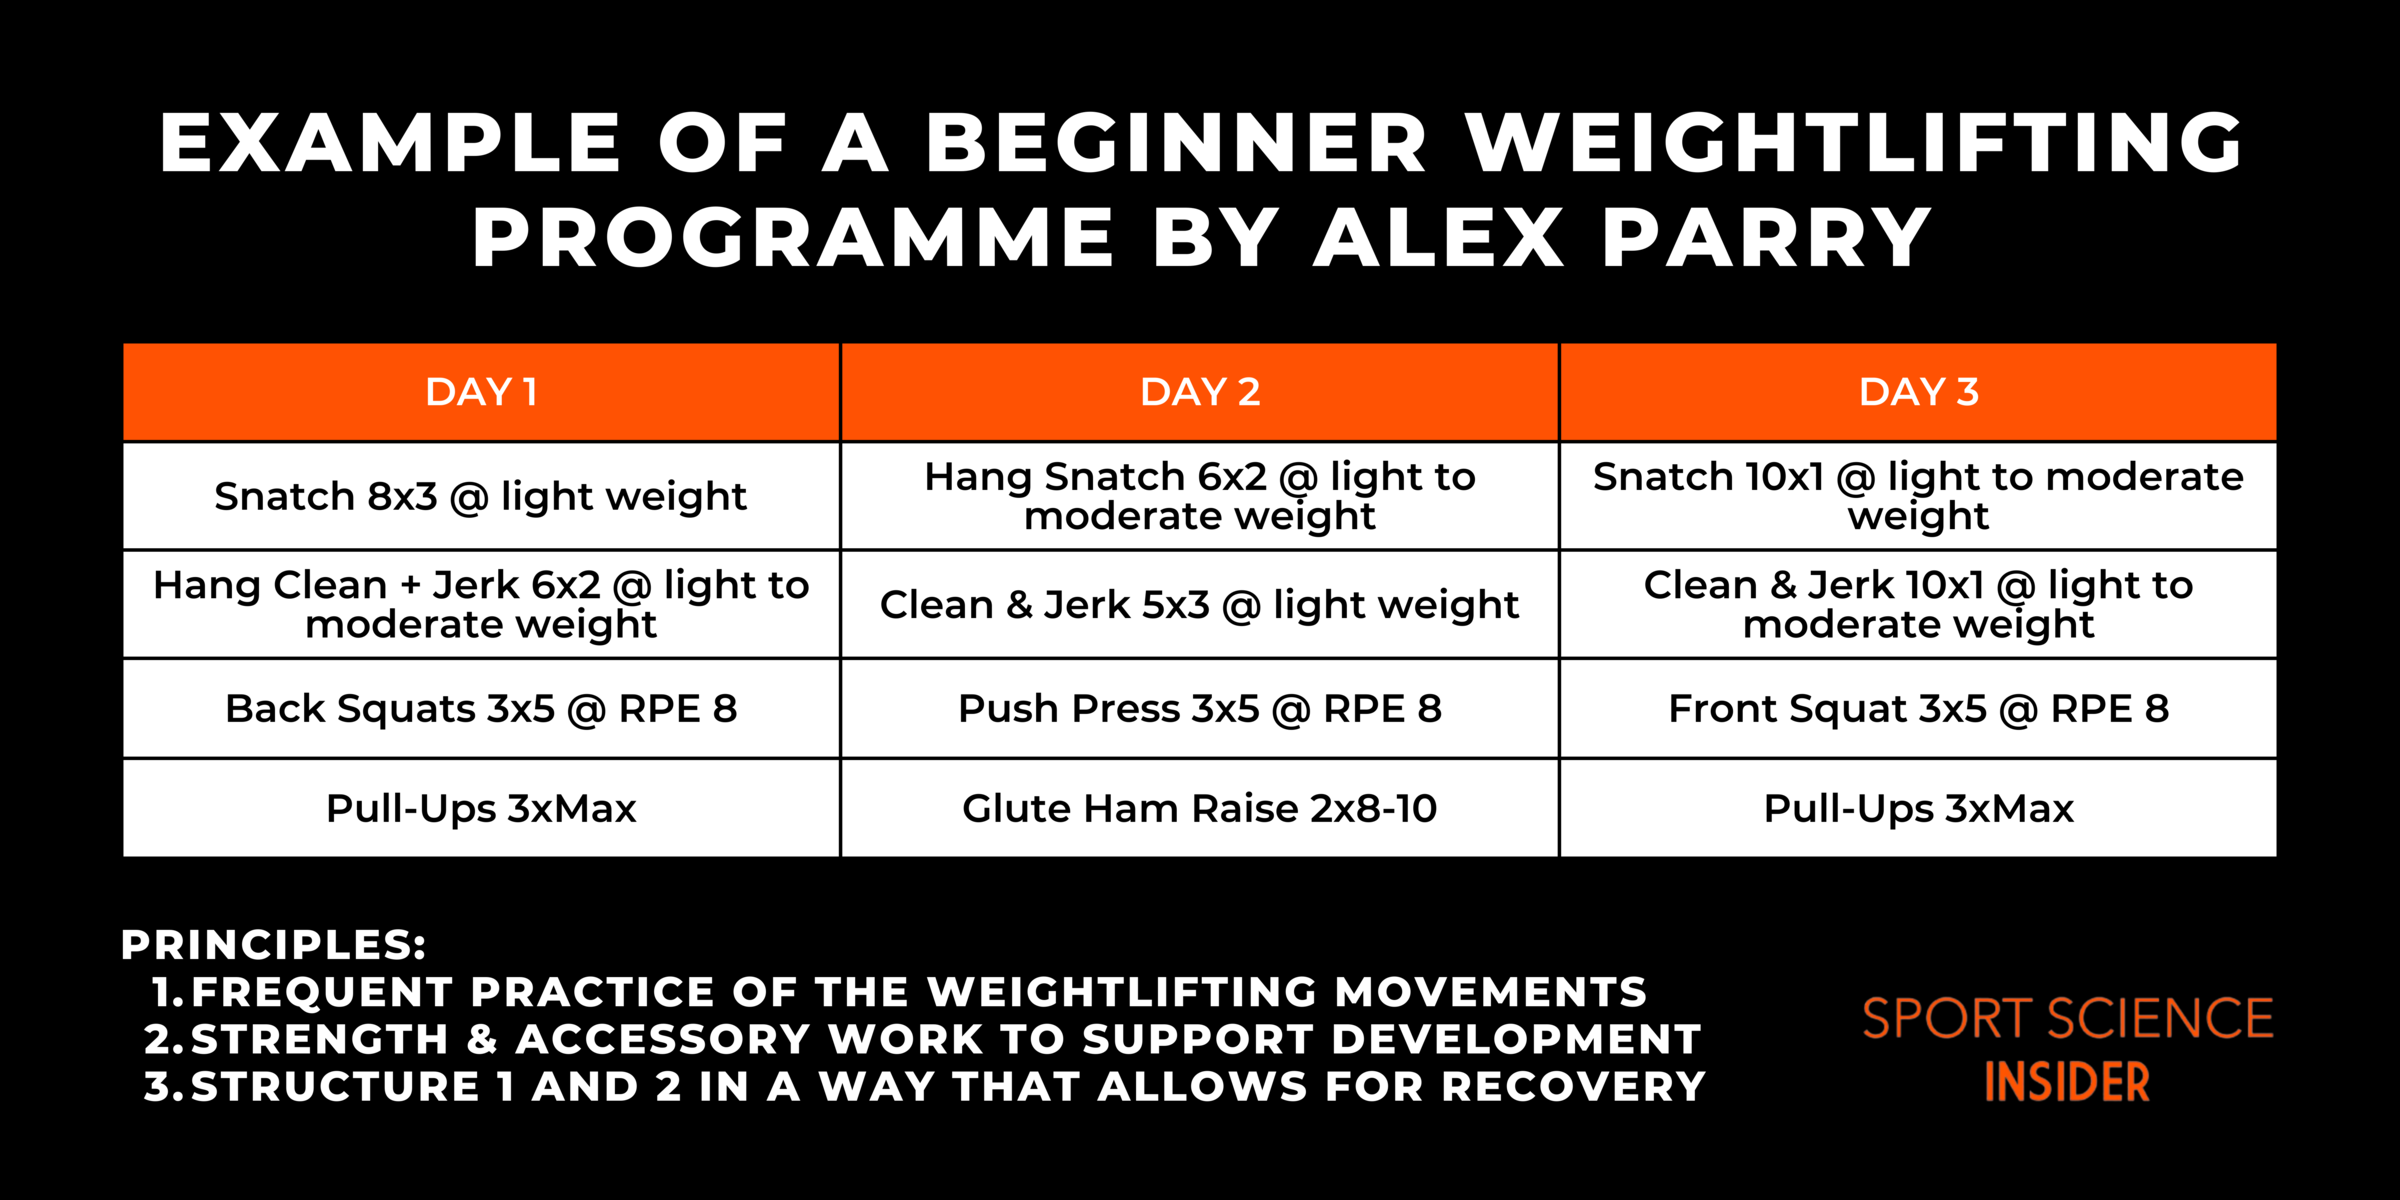 eXAMPLE OF A BEGINNER WEIGHTLIFTING PROGRAMME By Alex Parry